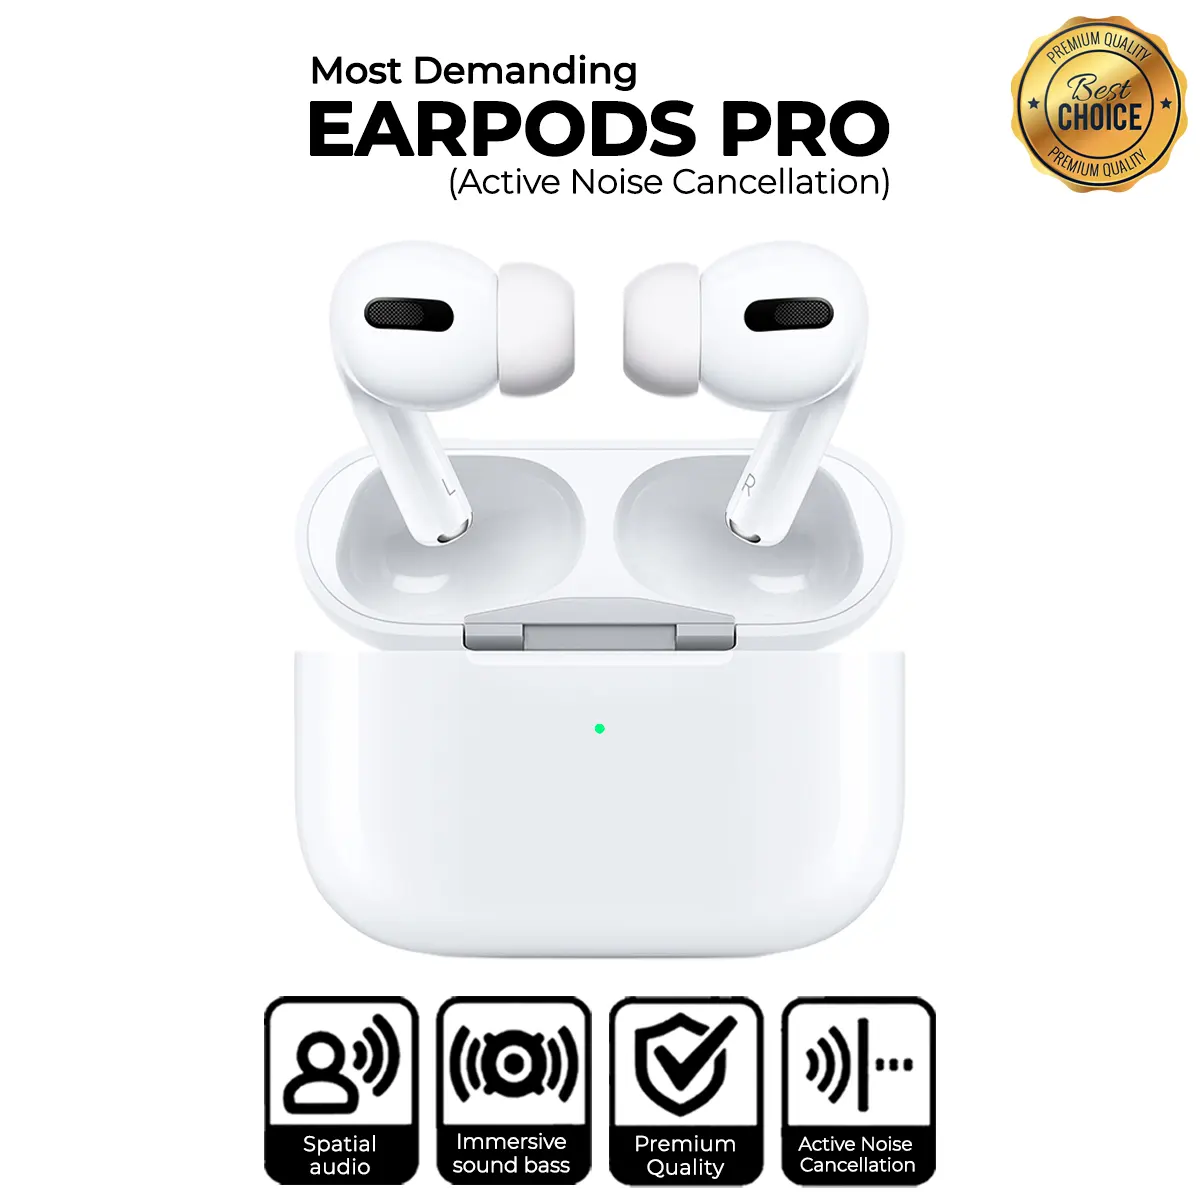 Buy Airpods Pro at best price in Pakistan | Rhizmall.pk